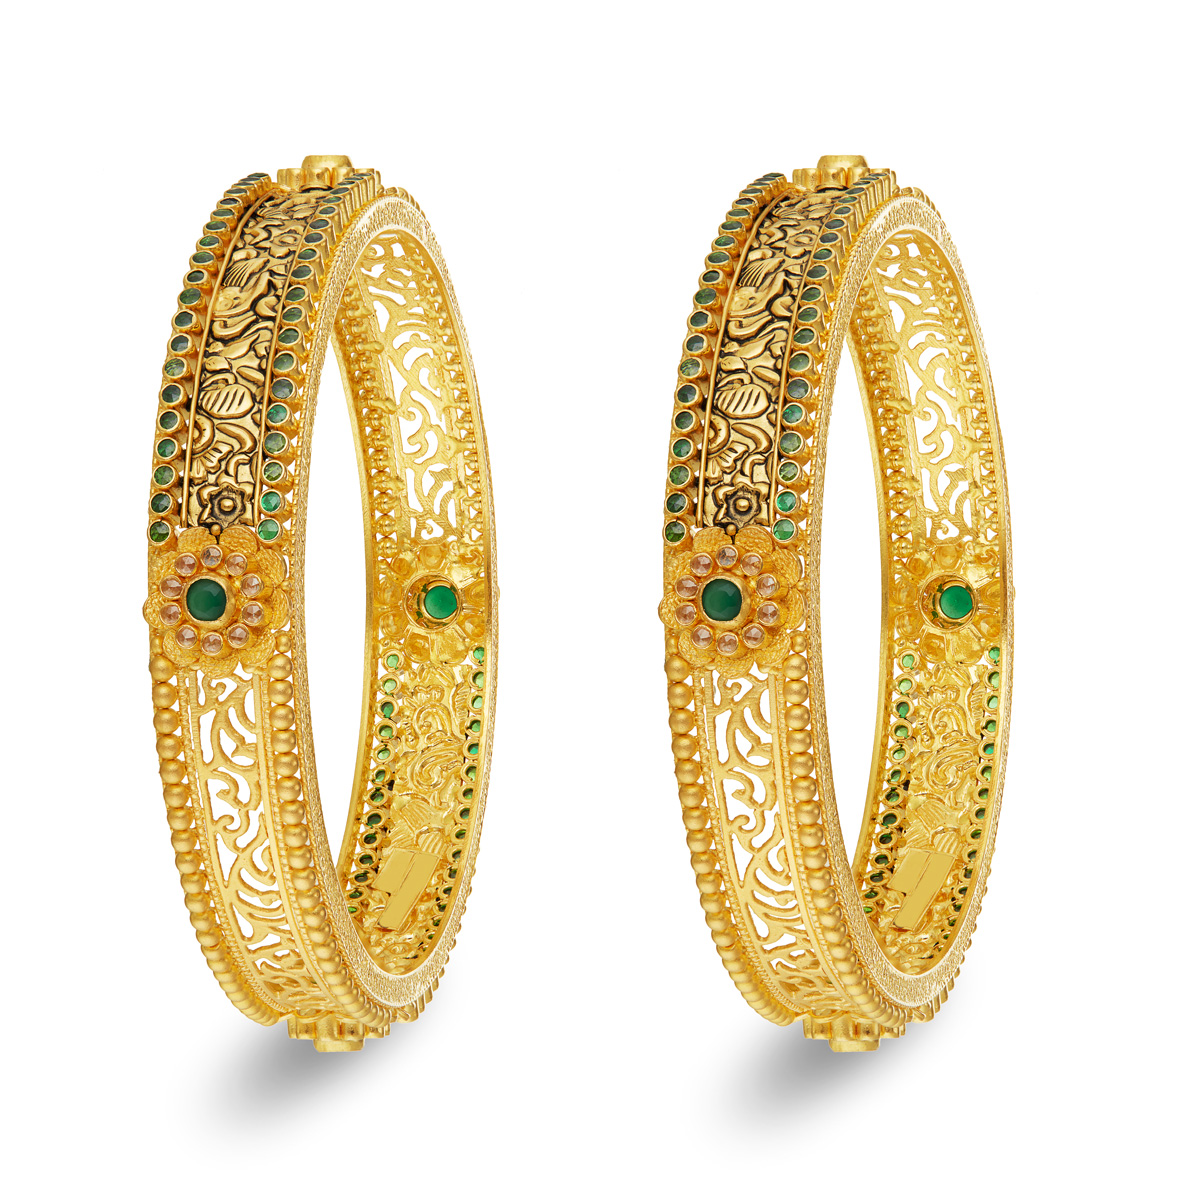 Attractive Pair of  Bangles